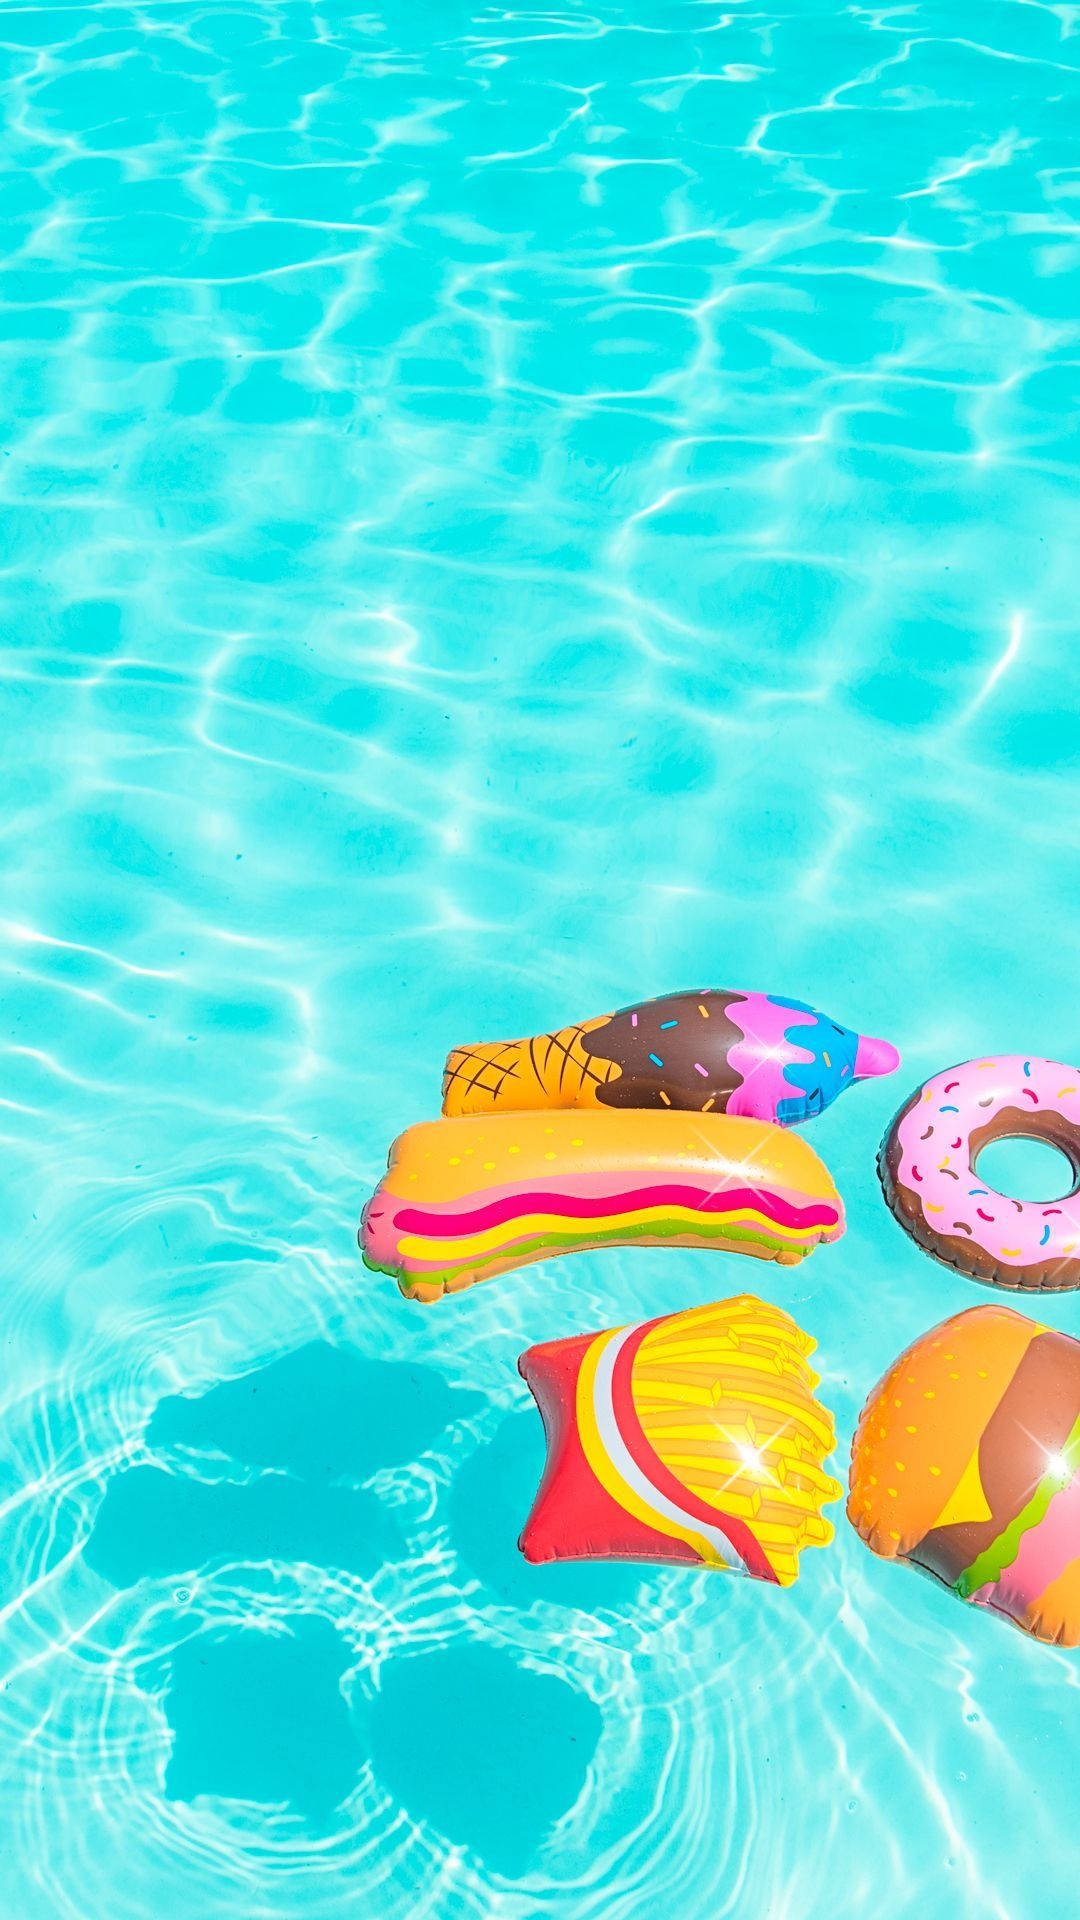 Food Inflatables In Summer Background